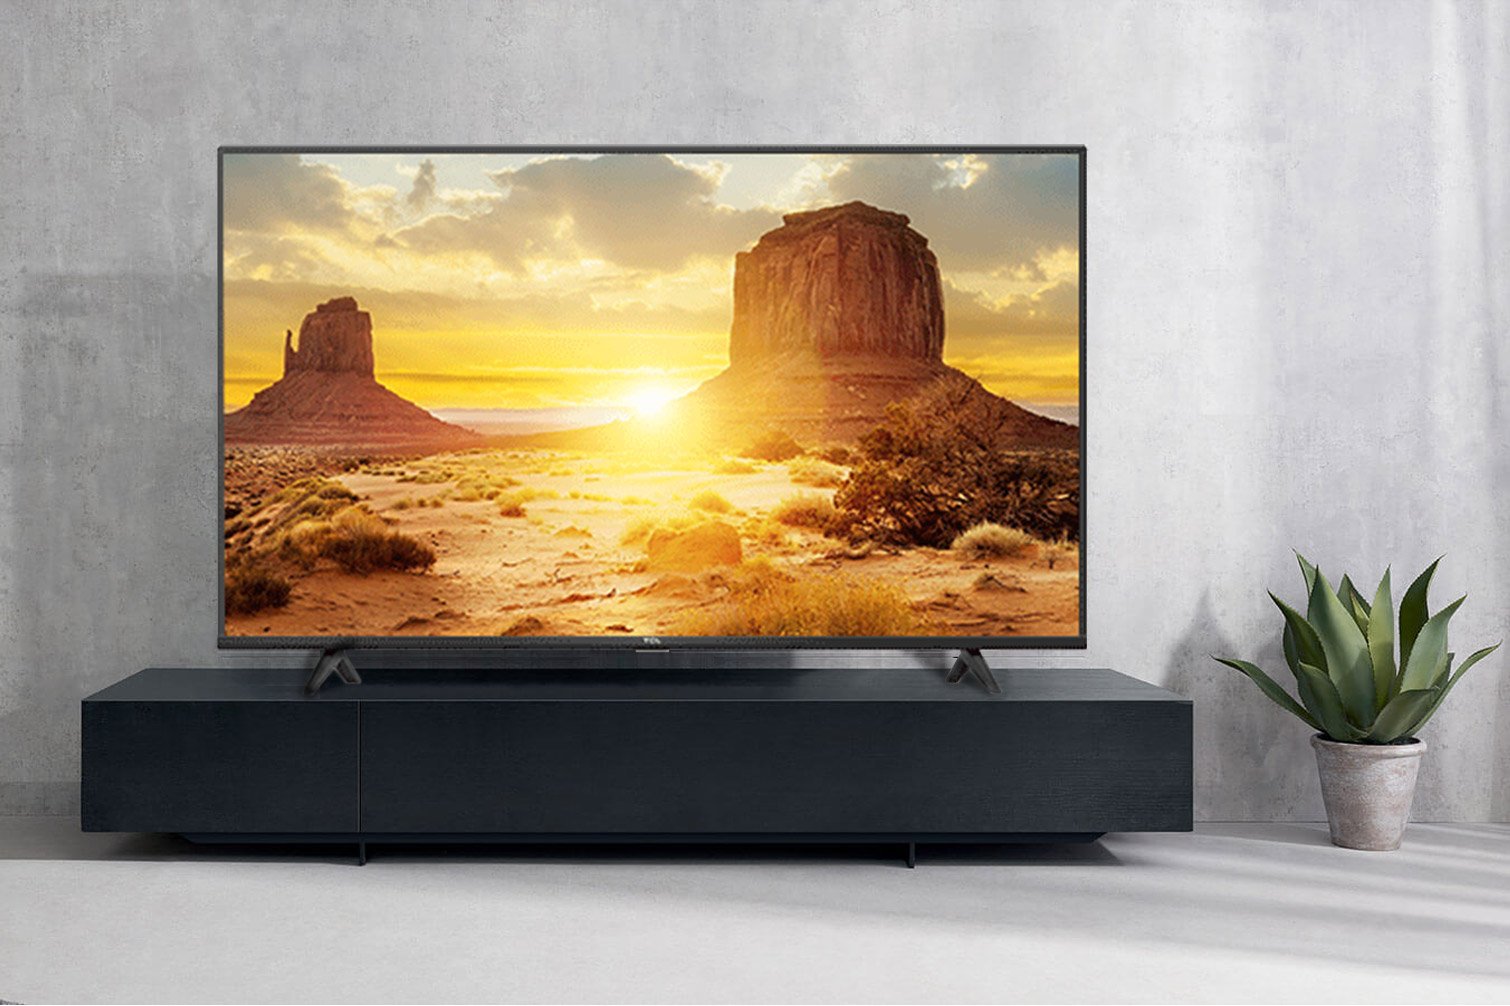 Smart Tivi TCL 4K 65P618 65 inch Android TV